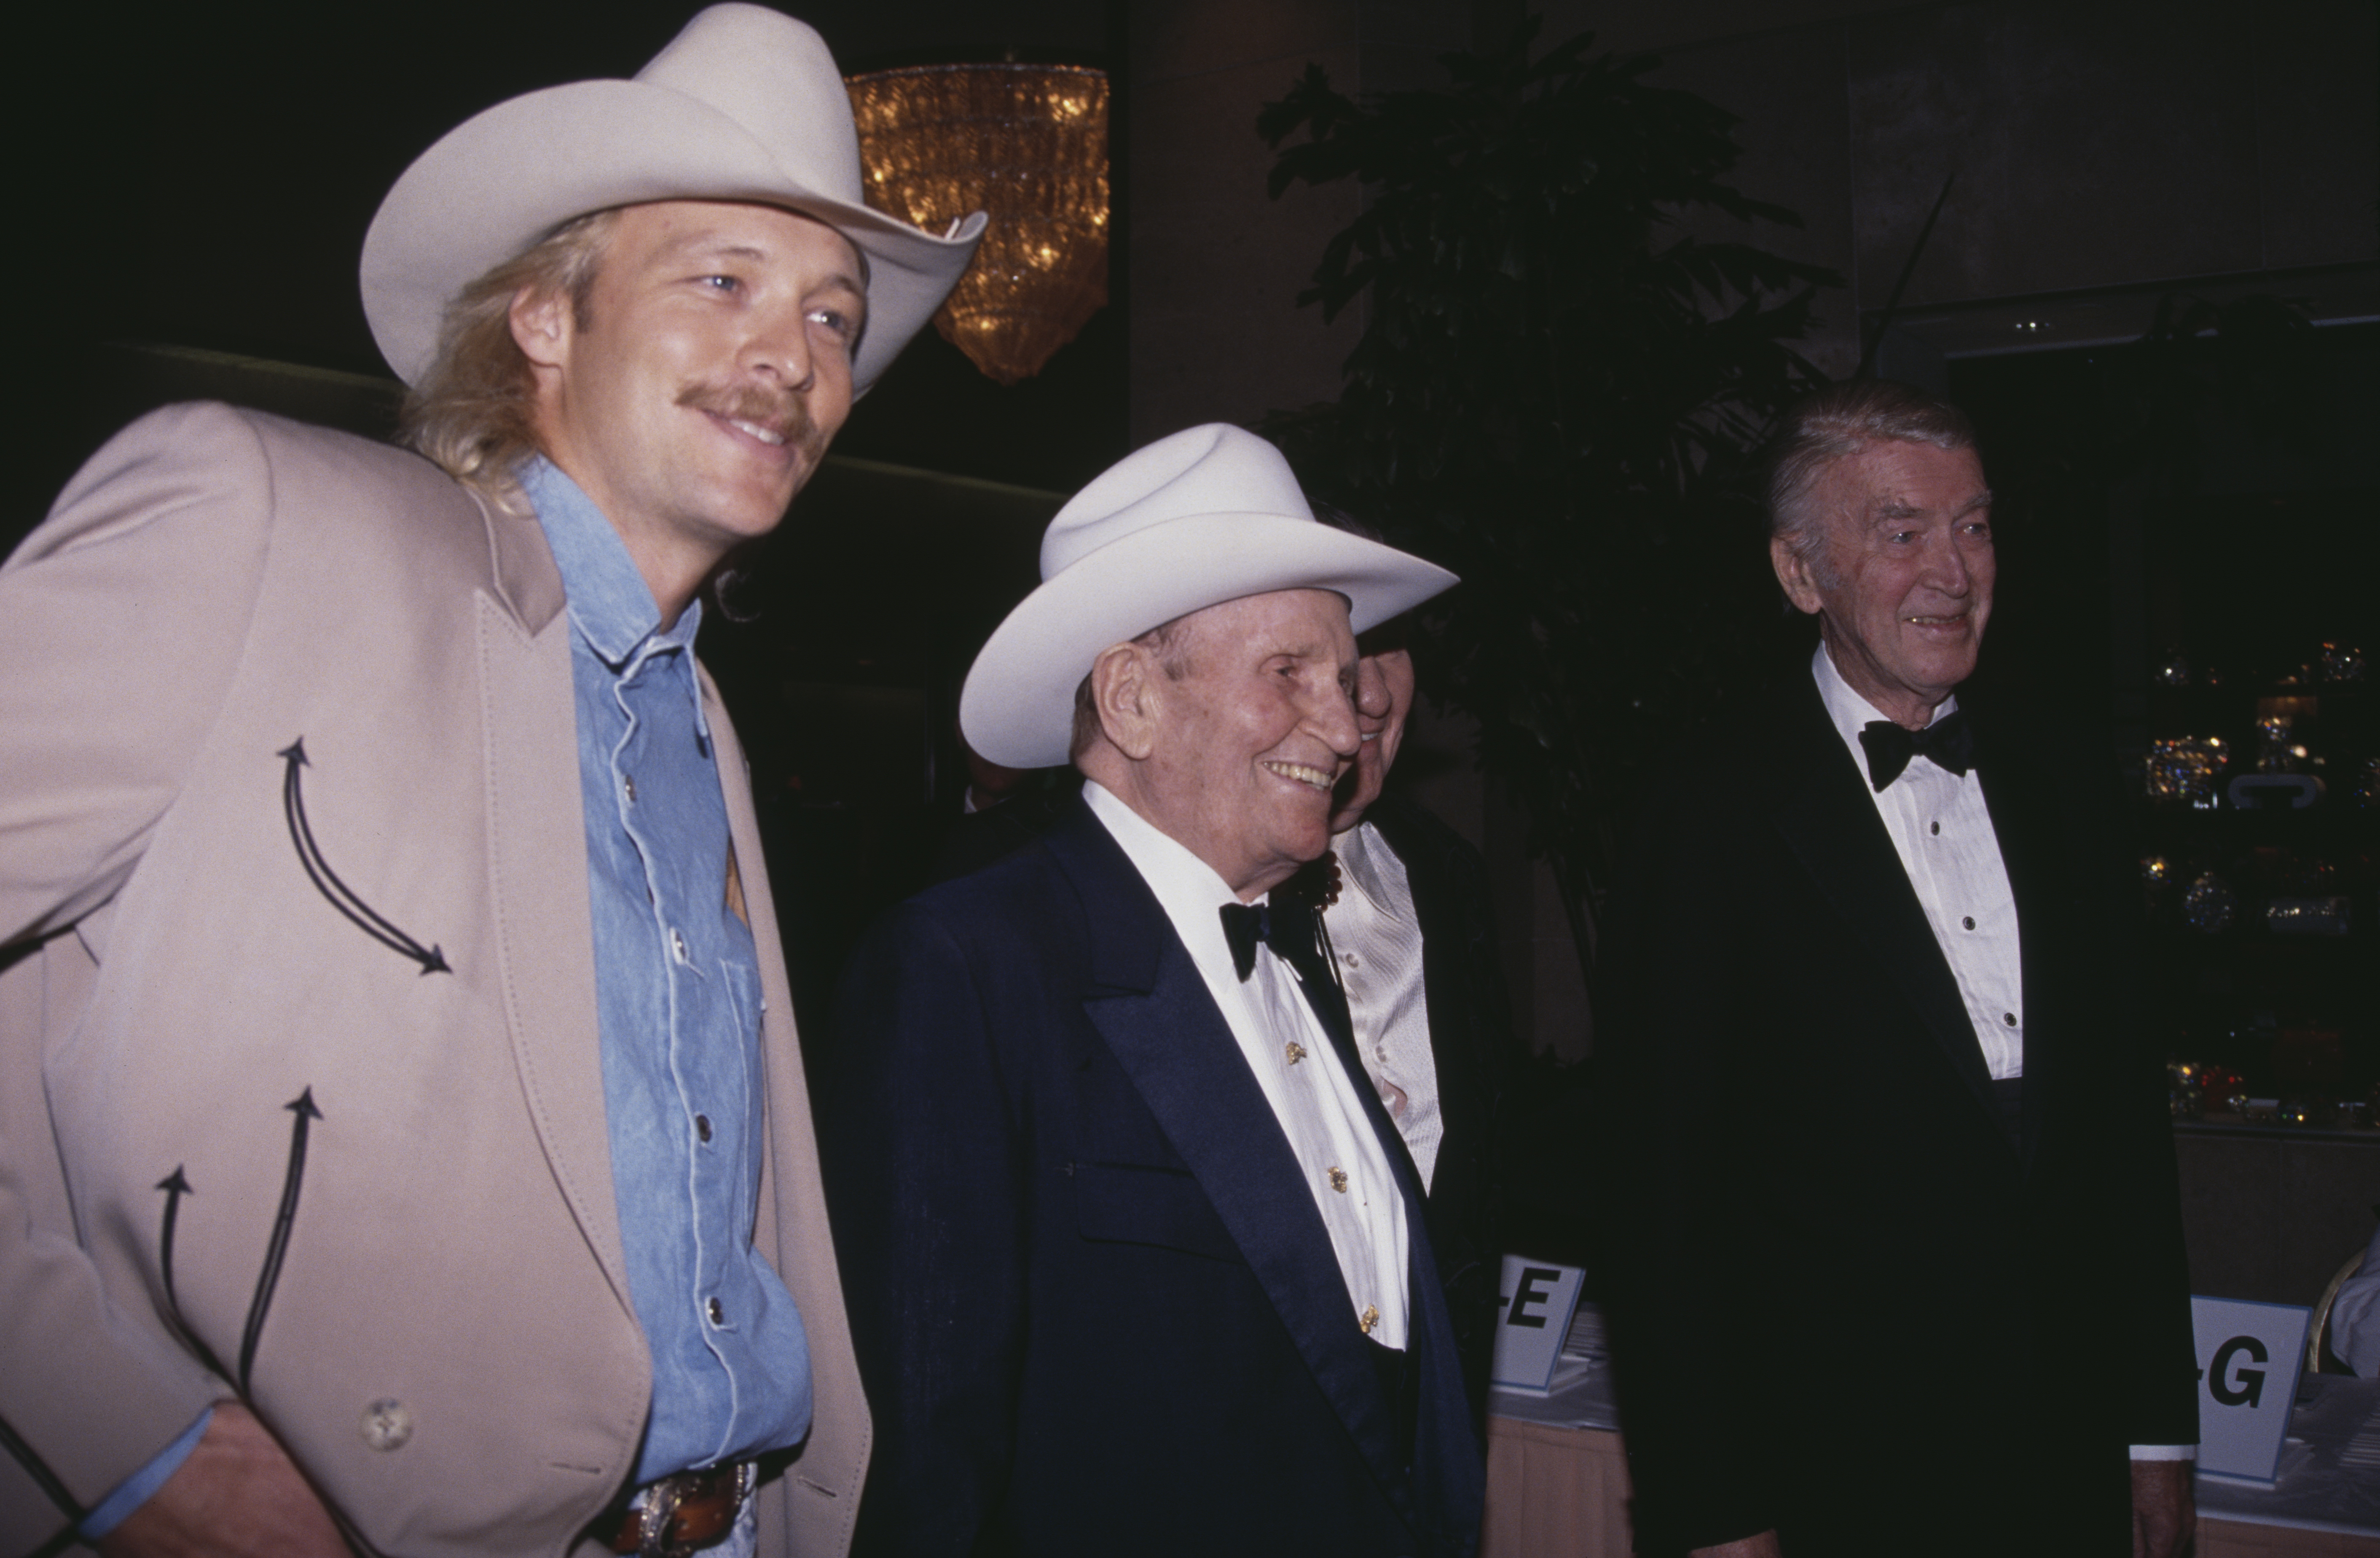 Alan Jackson, Gene Autry, and James Stewart, circa 1990 | Source: Getty Images